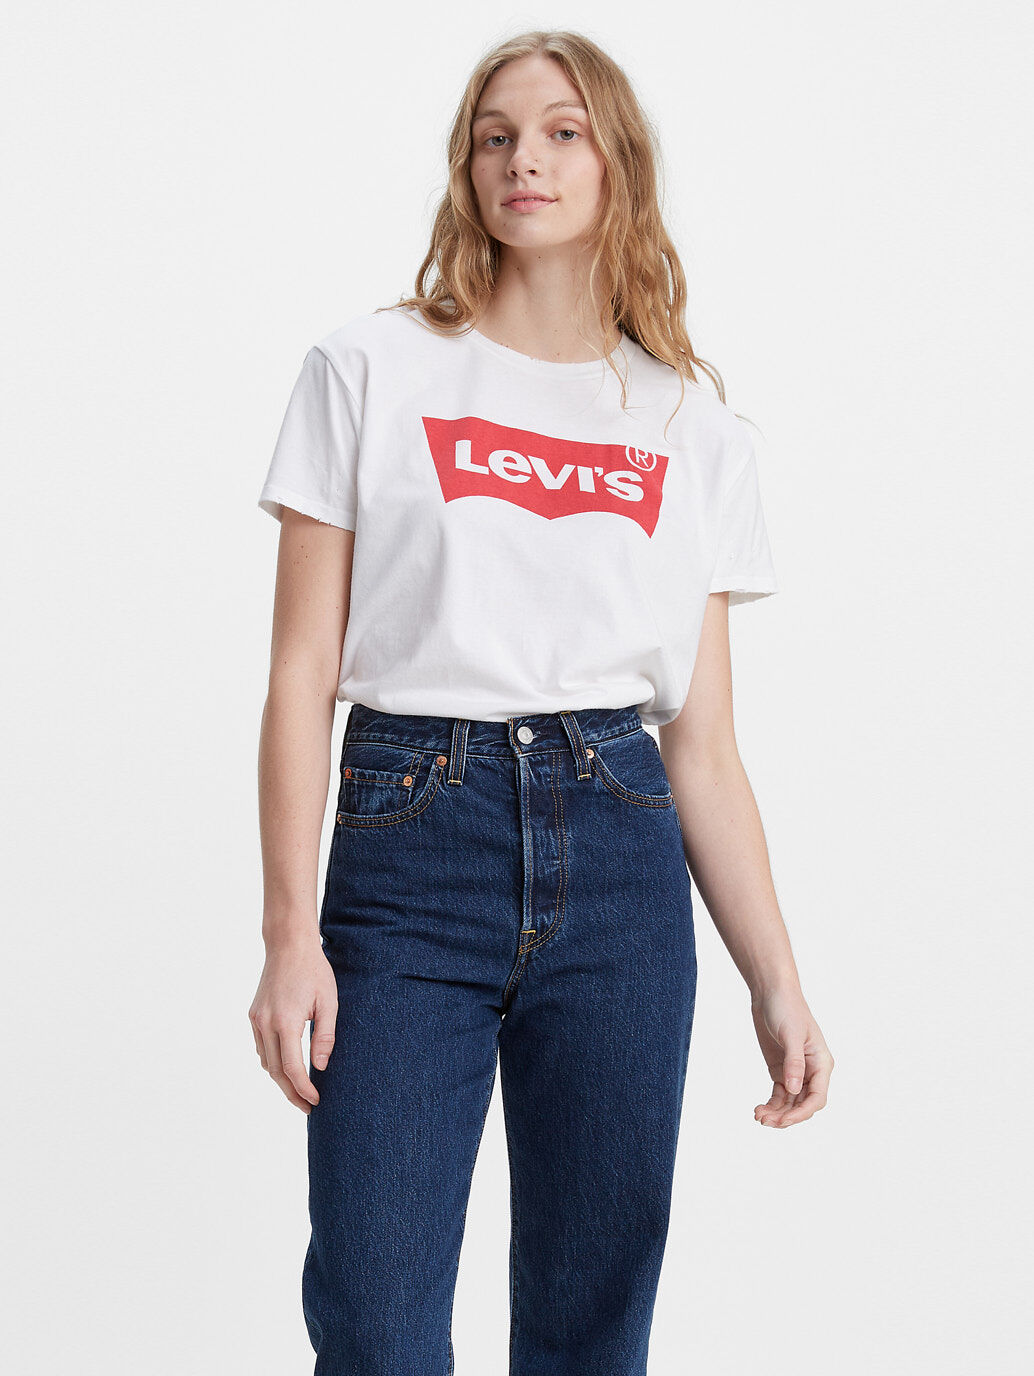 Women's Sale Clothing from Levi's 